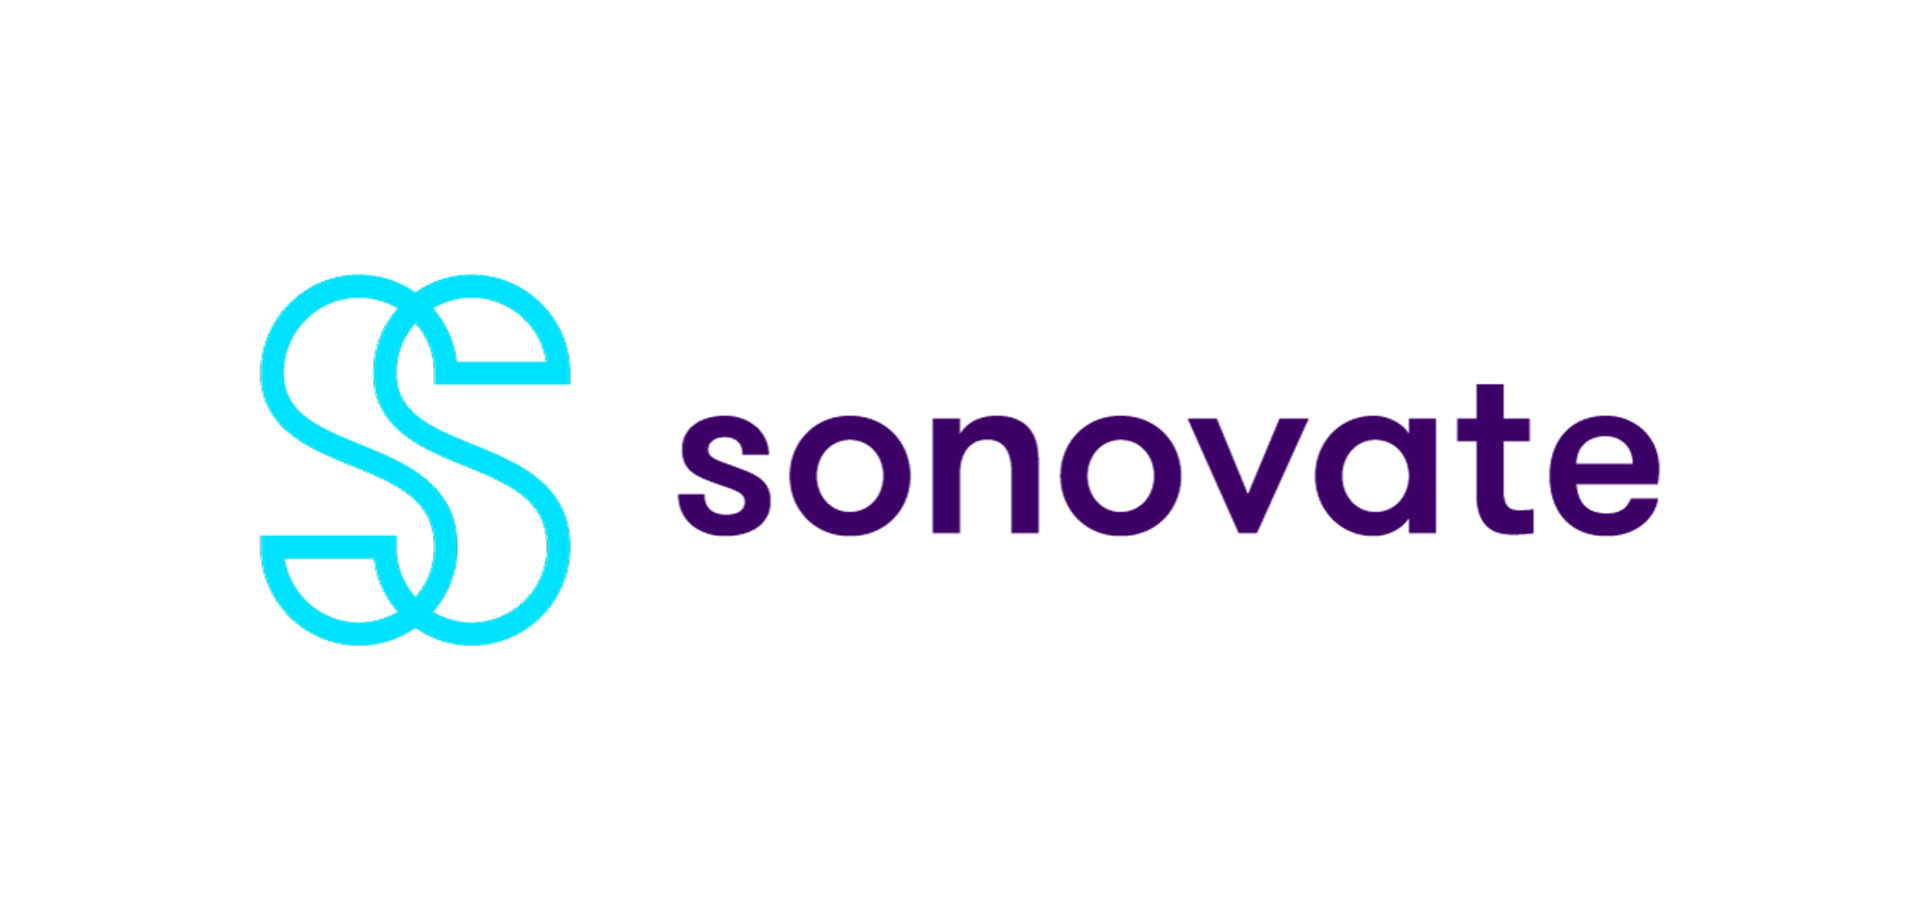 Sonovate Join The Recruitment Network as a Gold Partner